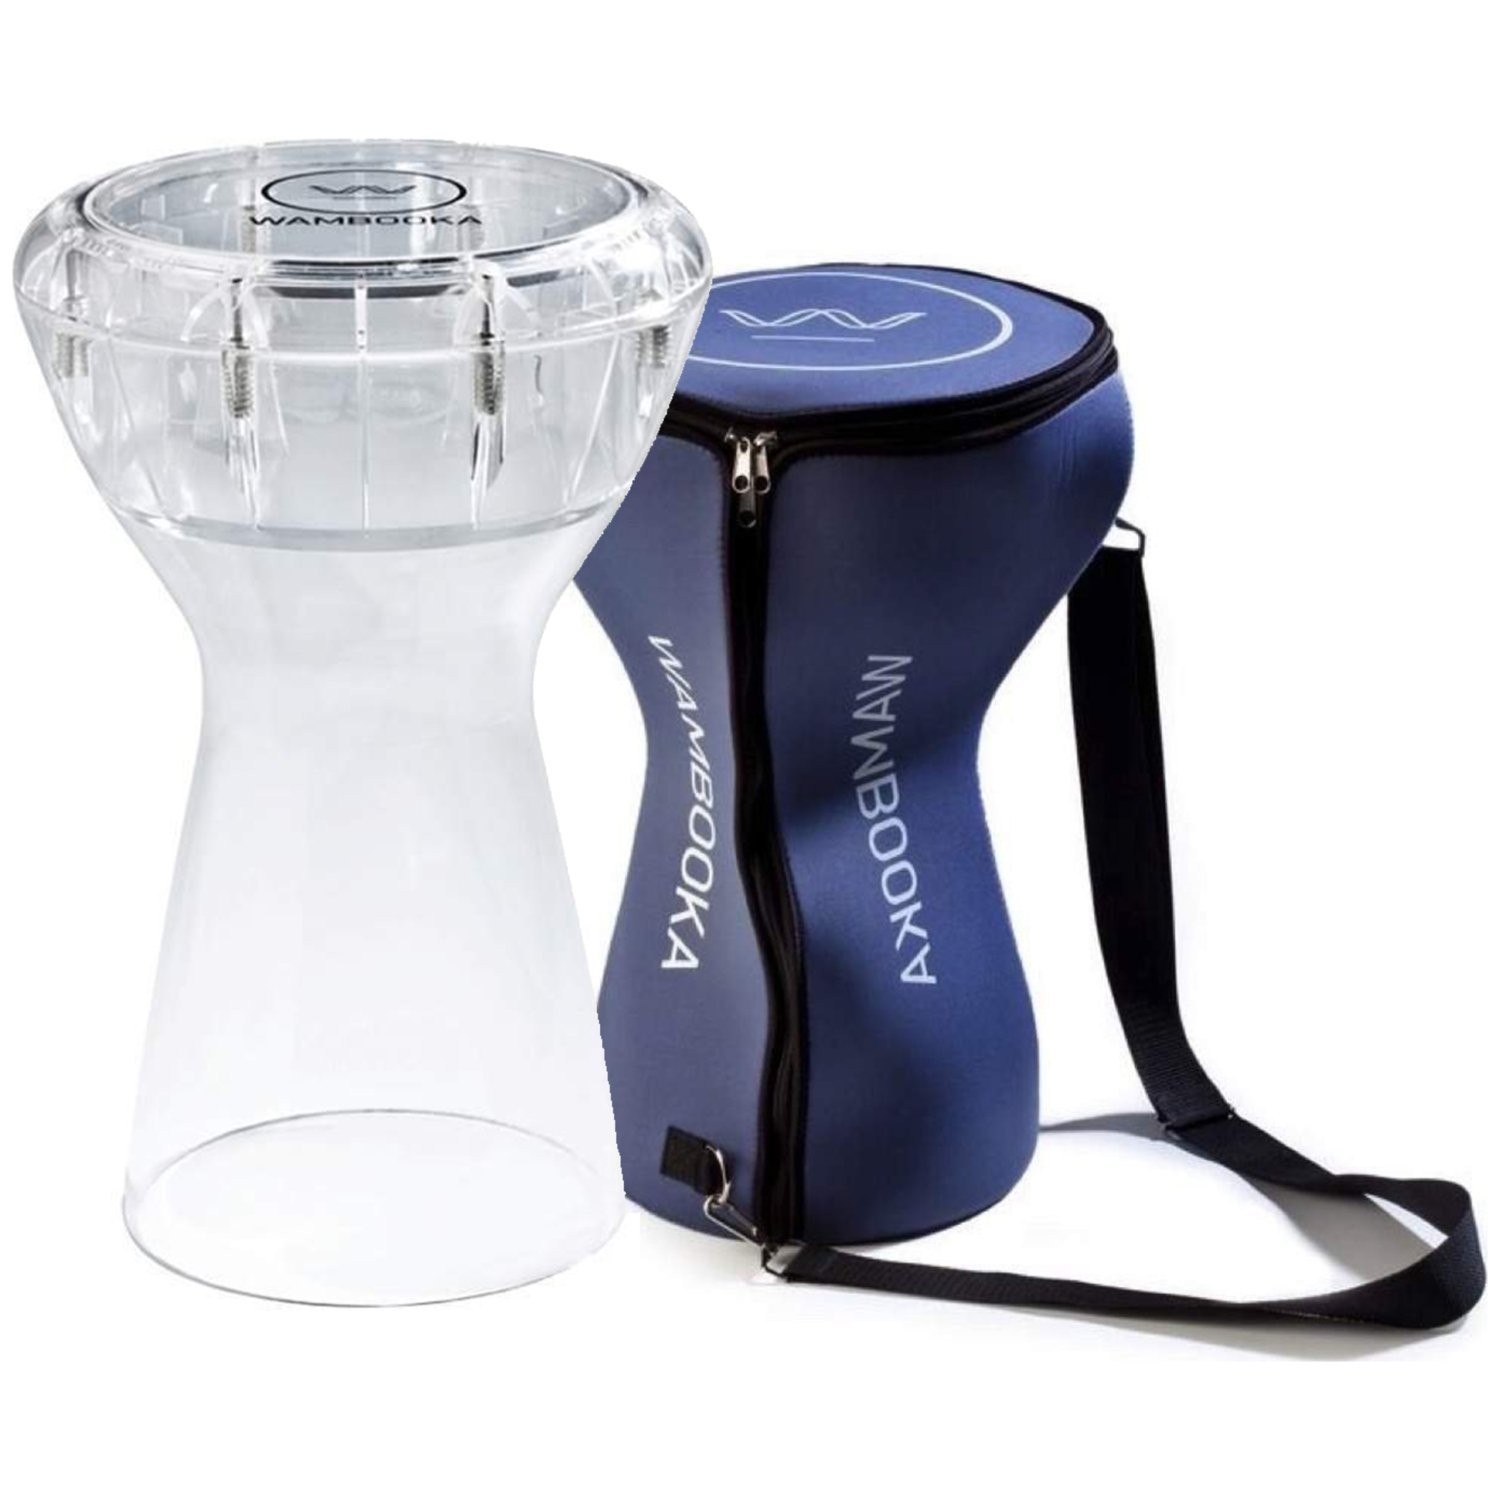 Wambooka Clear Darbuka Dry-Wet Hand Drum (with Carrying Bag)